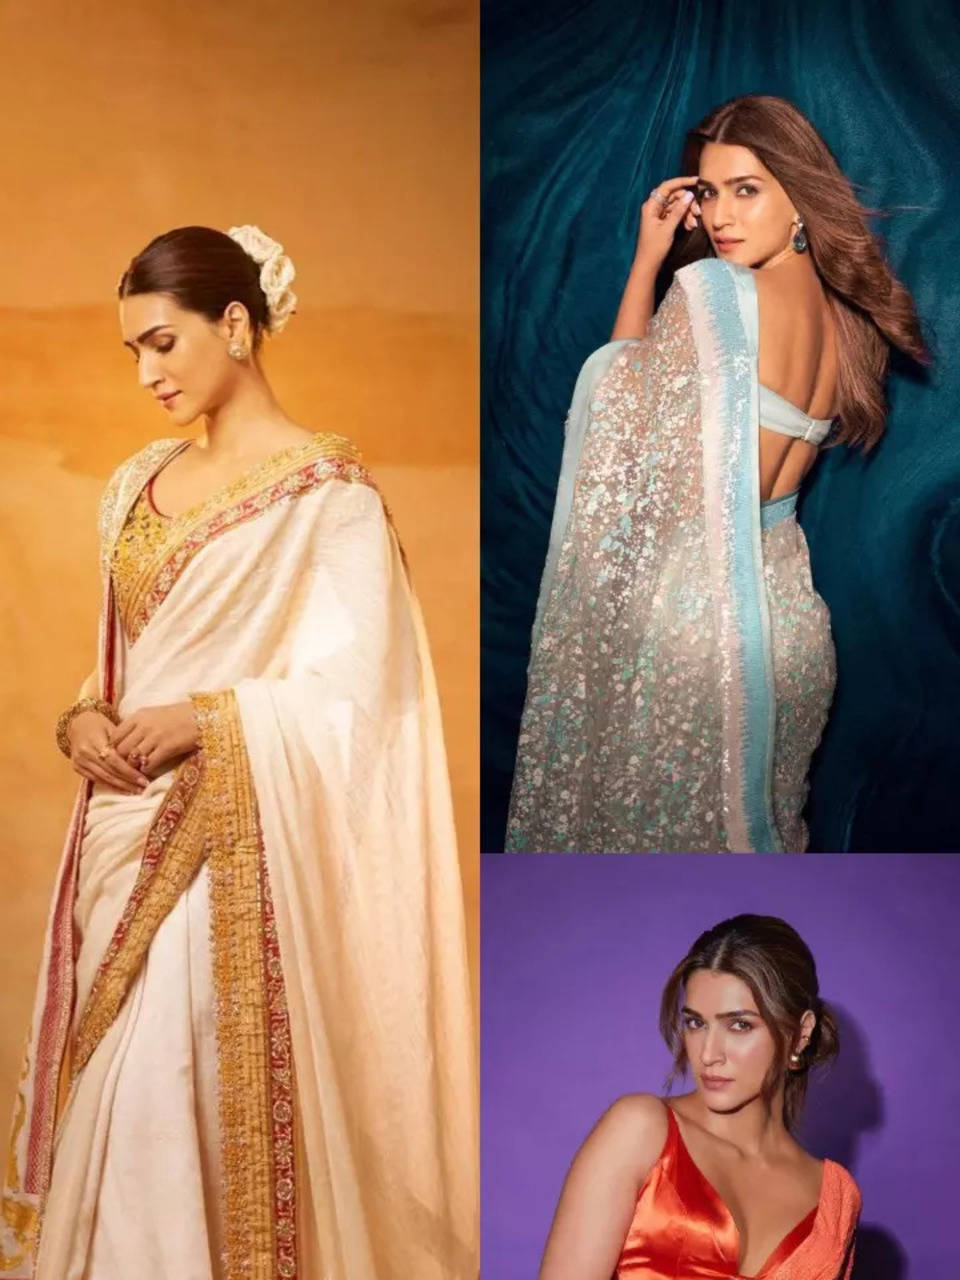 Times when Kriti Sanon looked mesmerising in sarees | Times of India